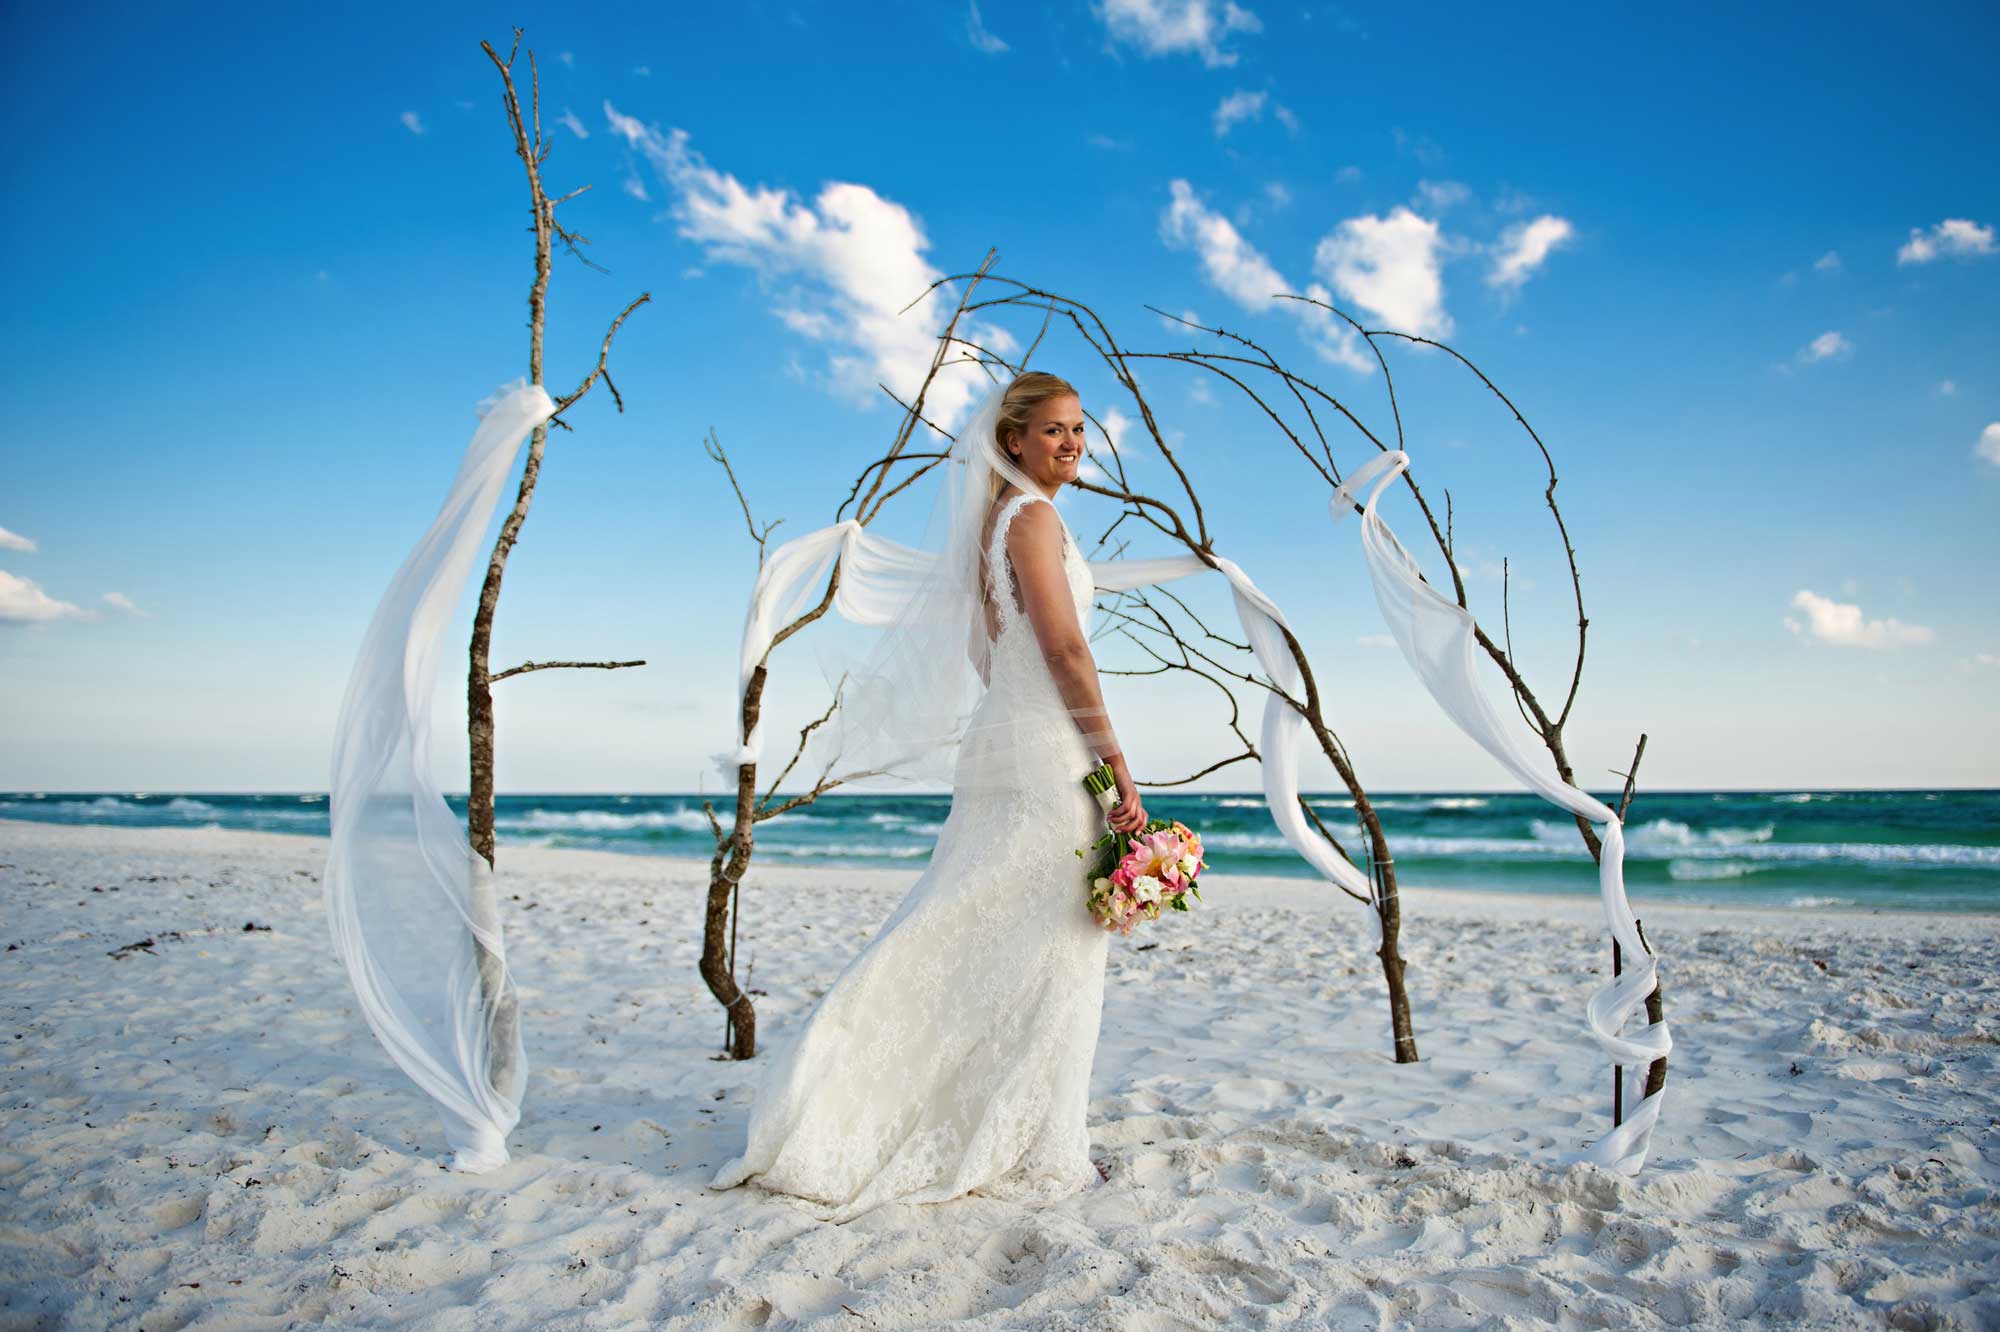 Destination Weddings Venues With Best Views | Unique Places to Get Married | Best Wedding Resorts | Watercolor Inn Florida